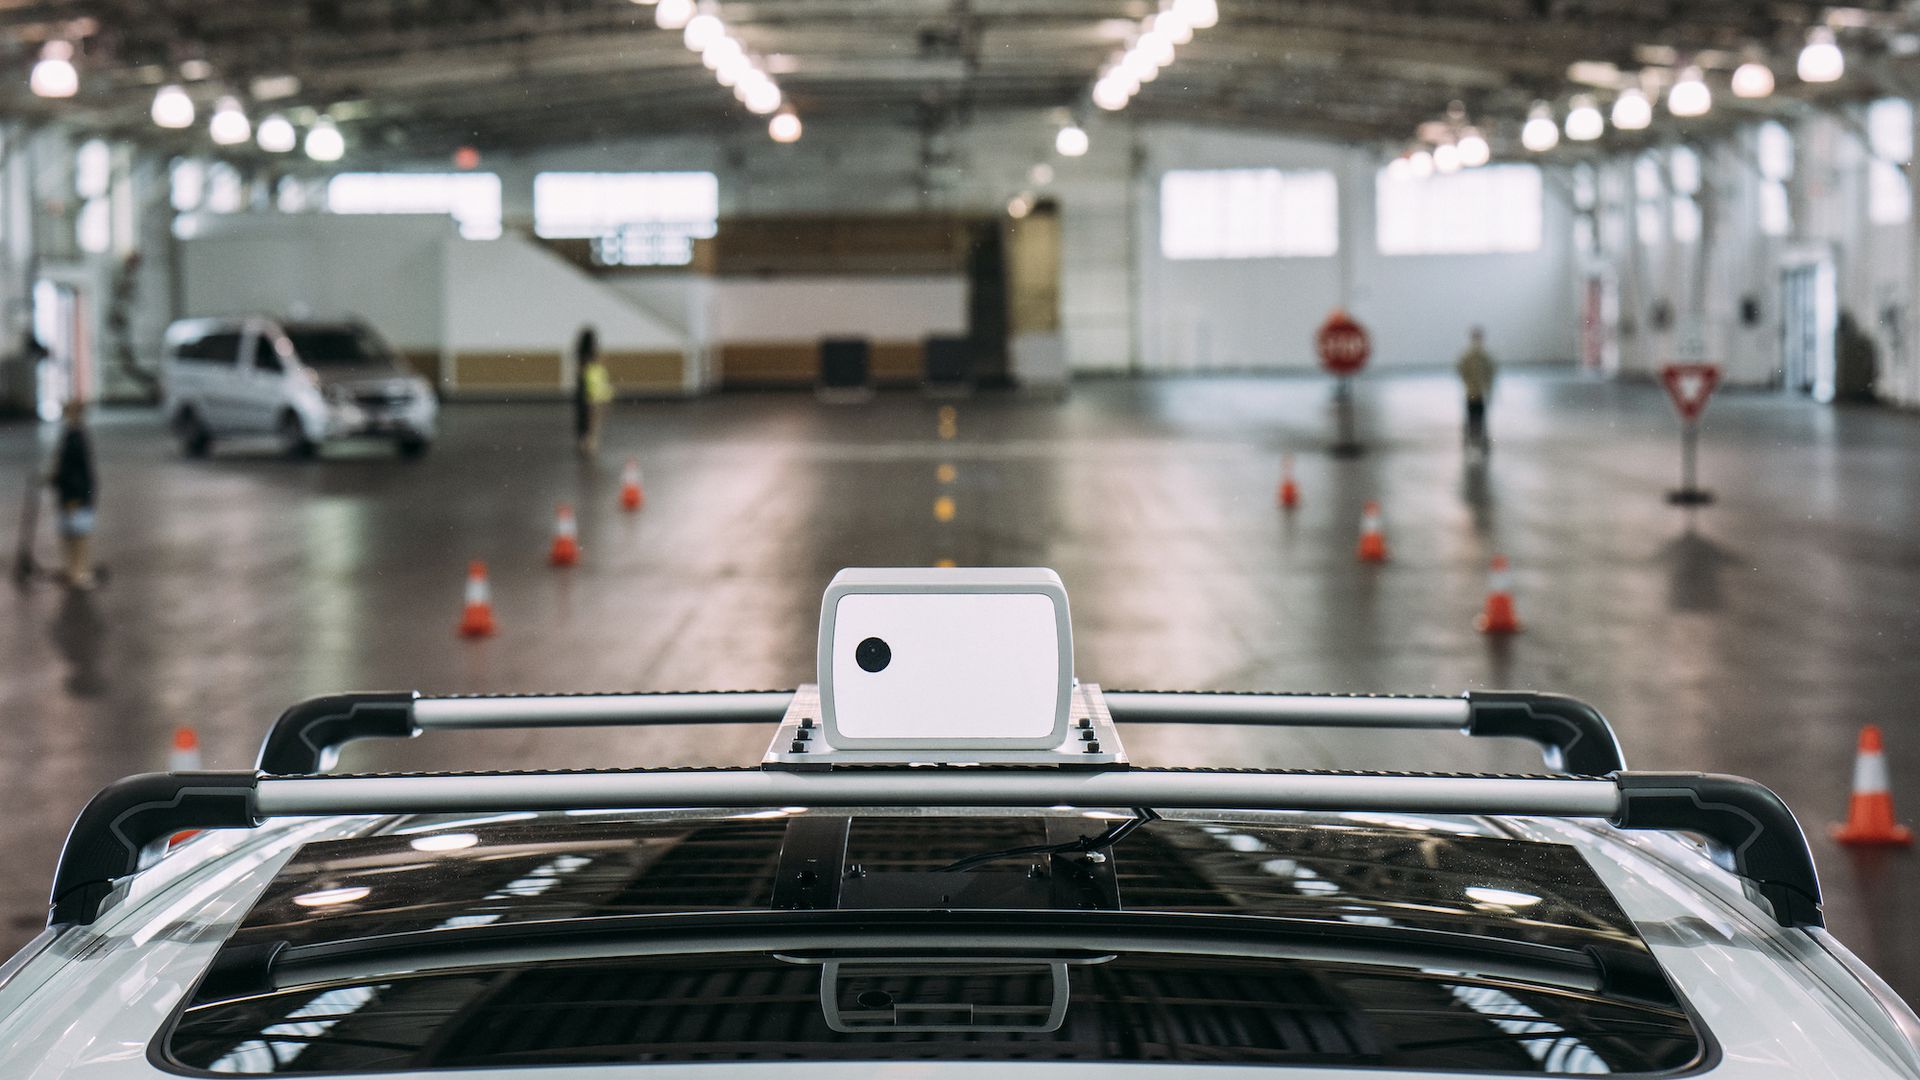 Former Apple engineers introduced a new sensor for self-driving cars